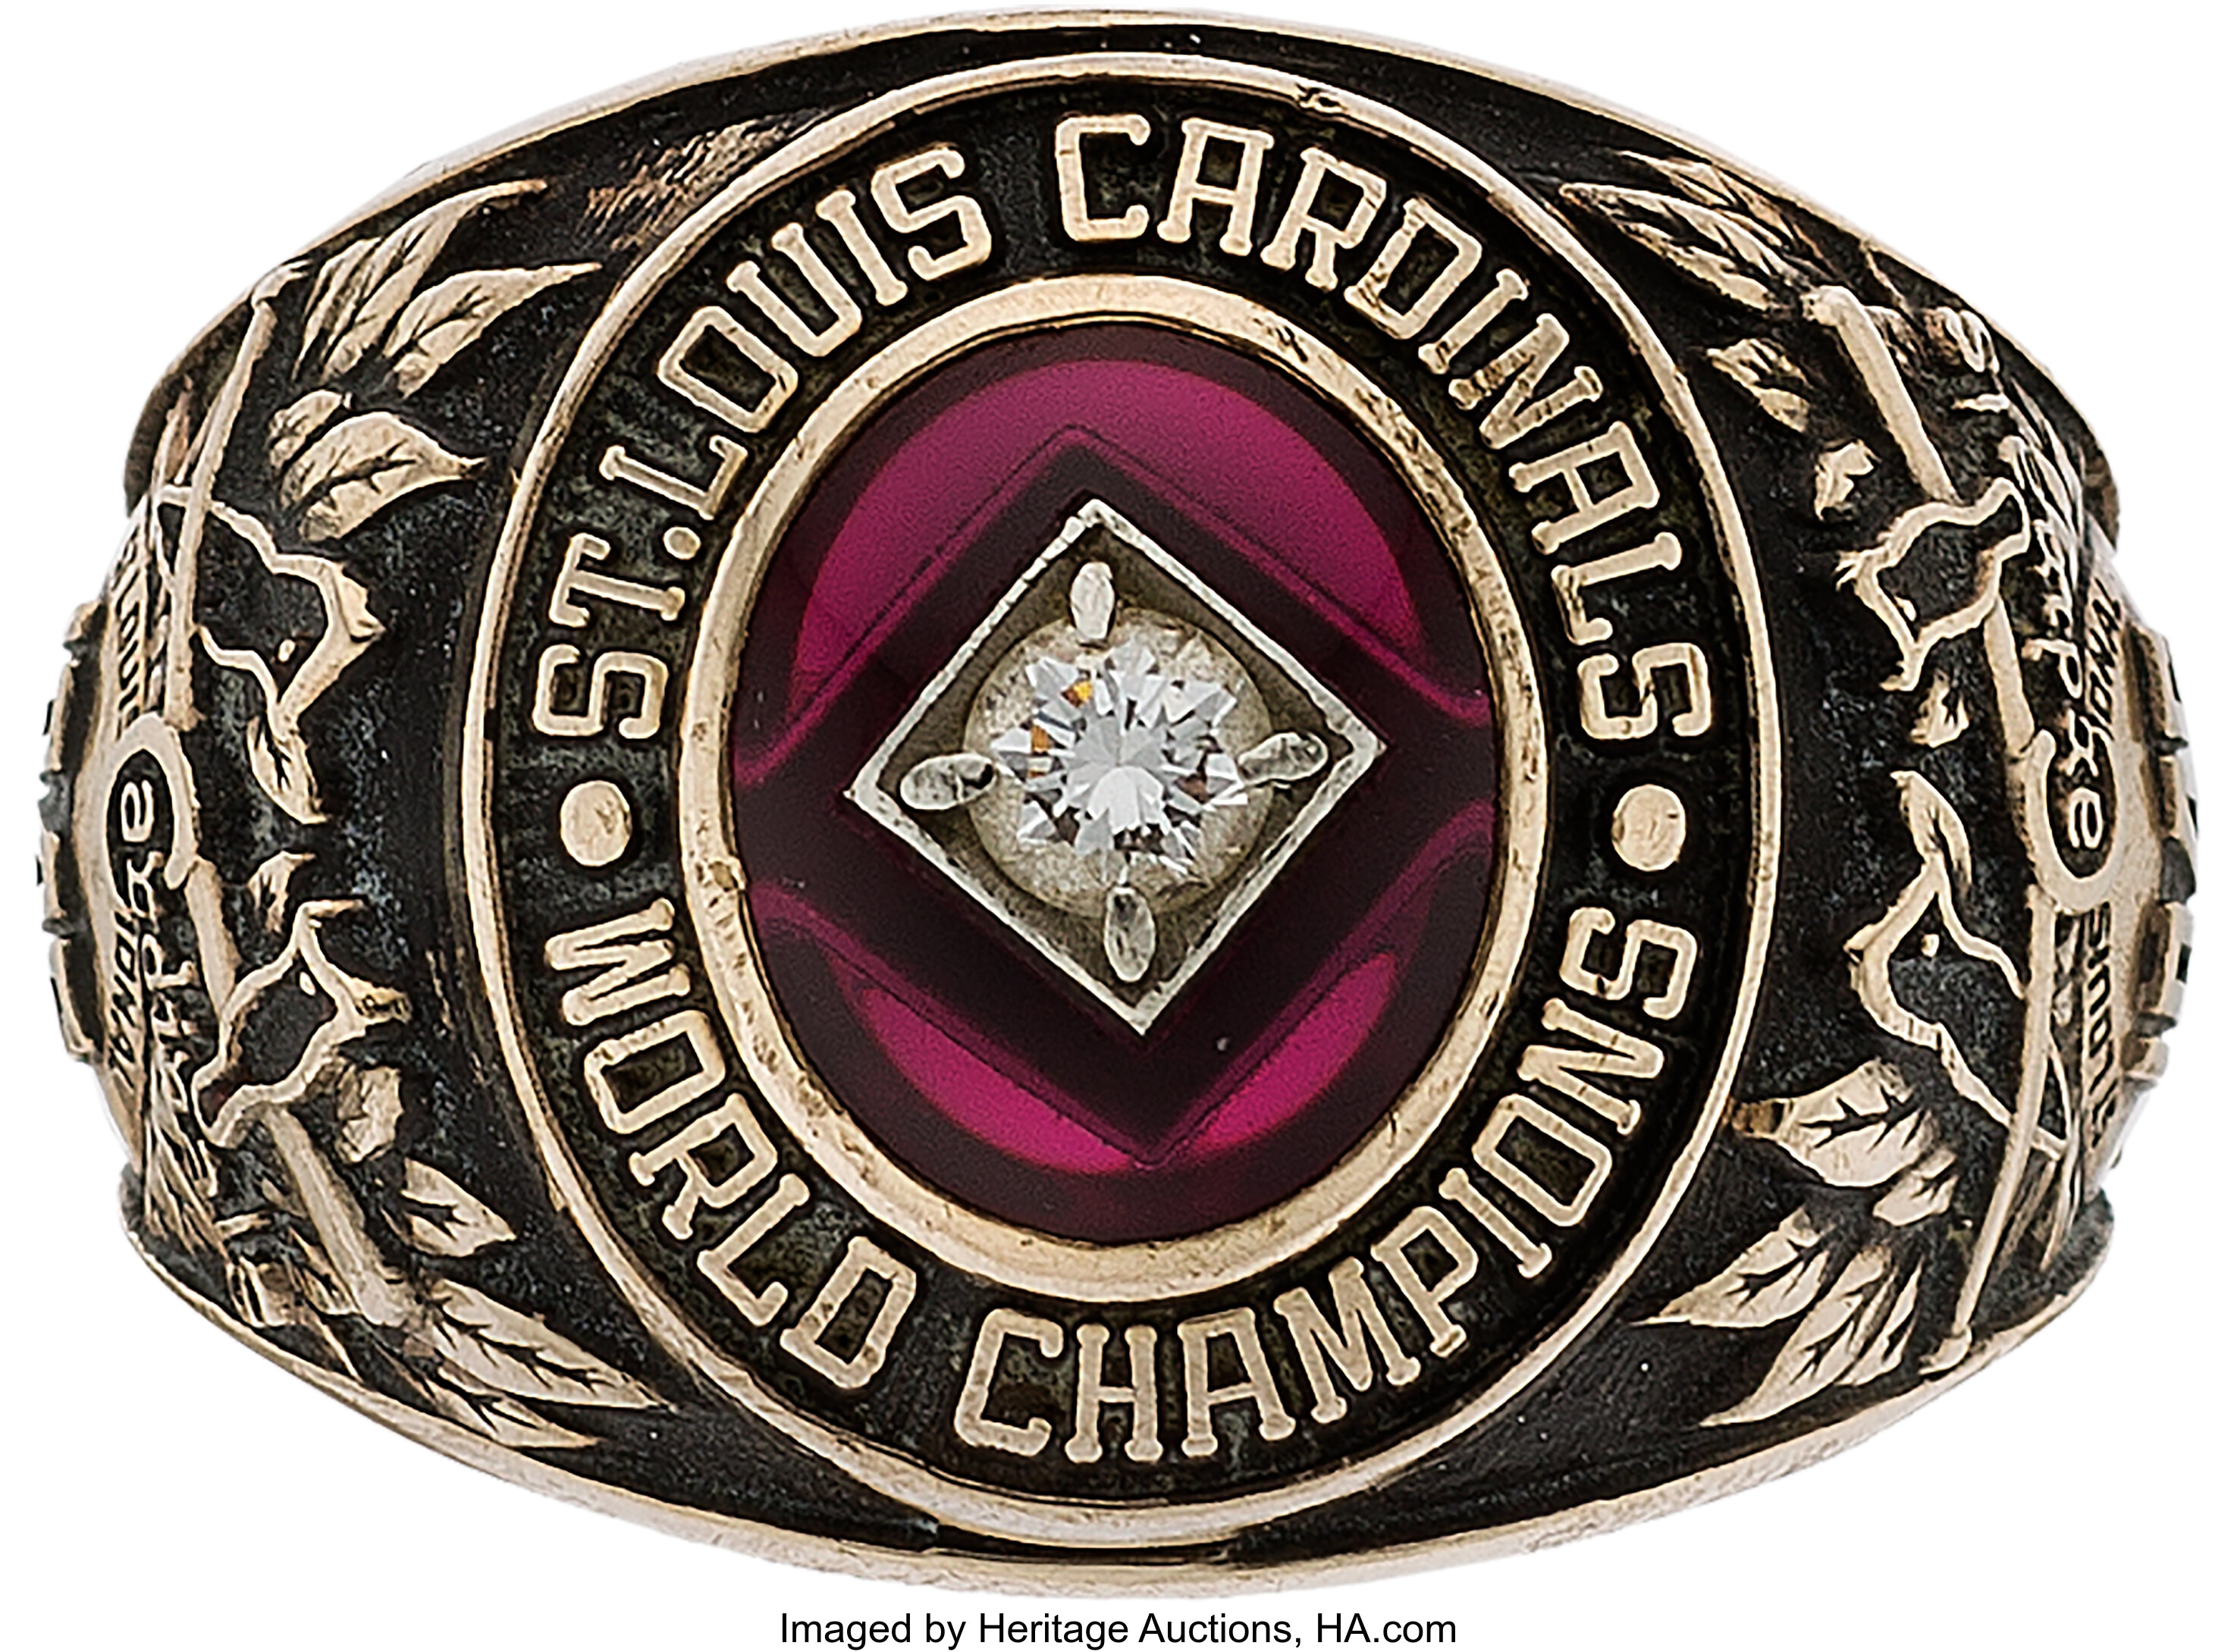 1946 St. Louis Cardinals World Championship Replacement Ring, Lot #56573